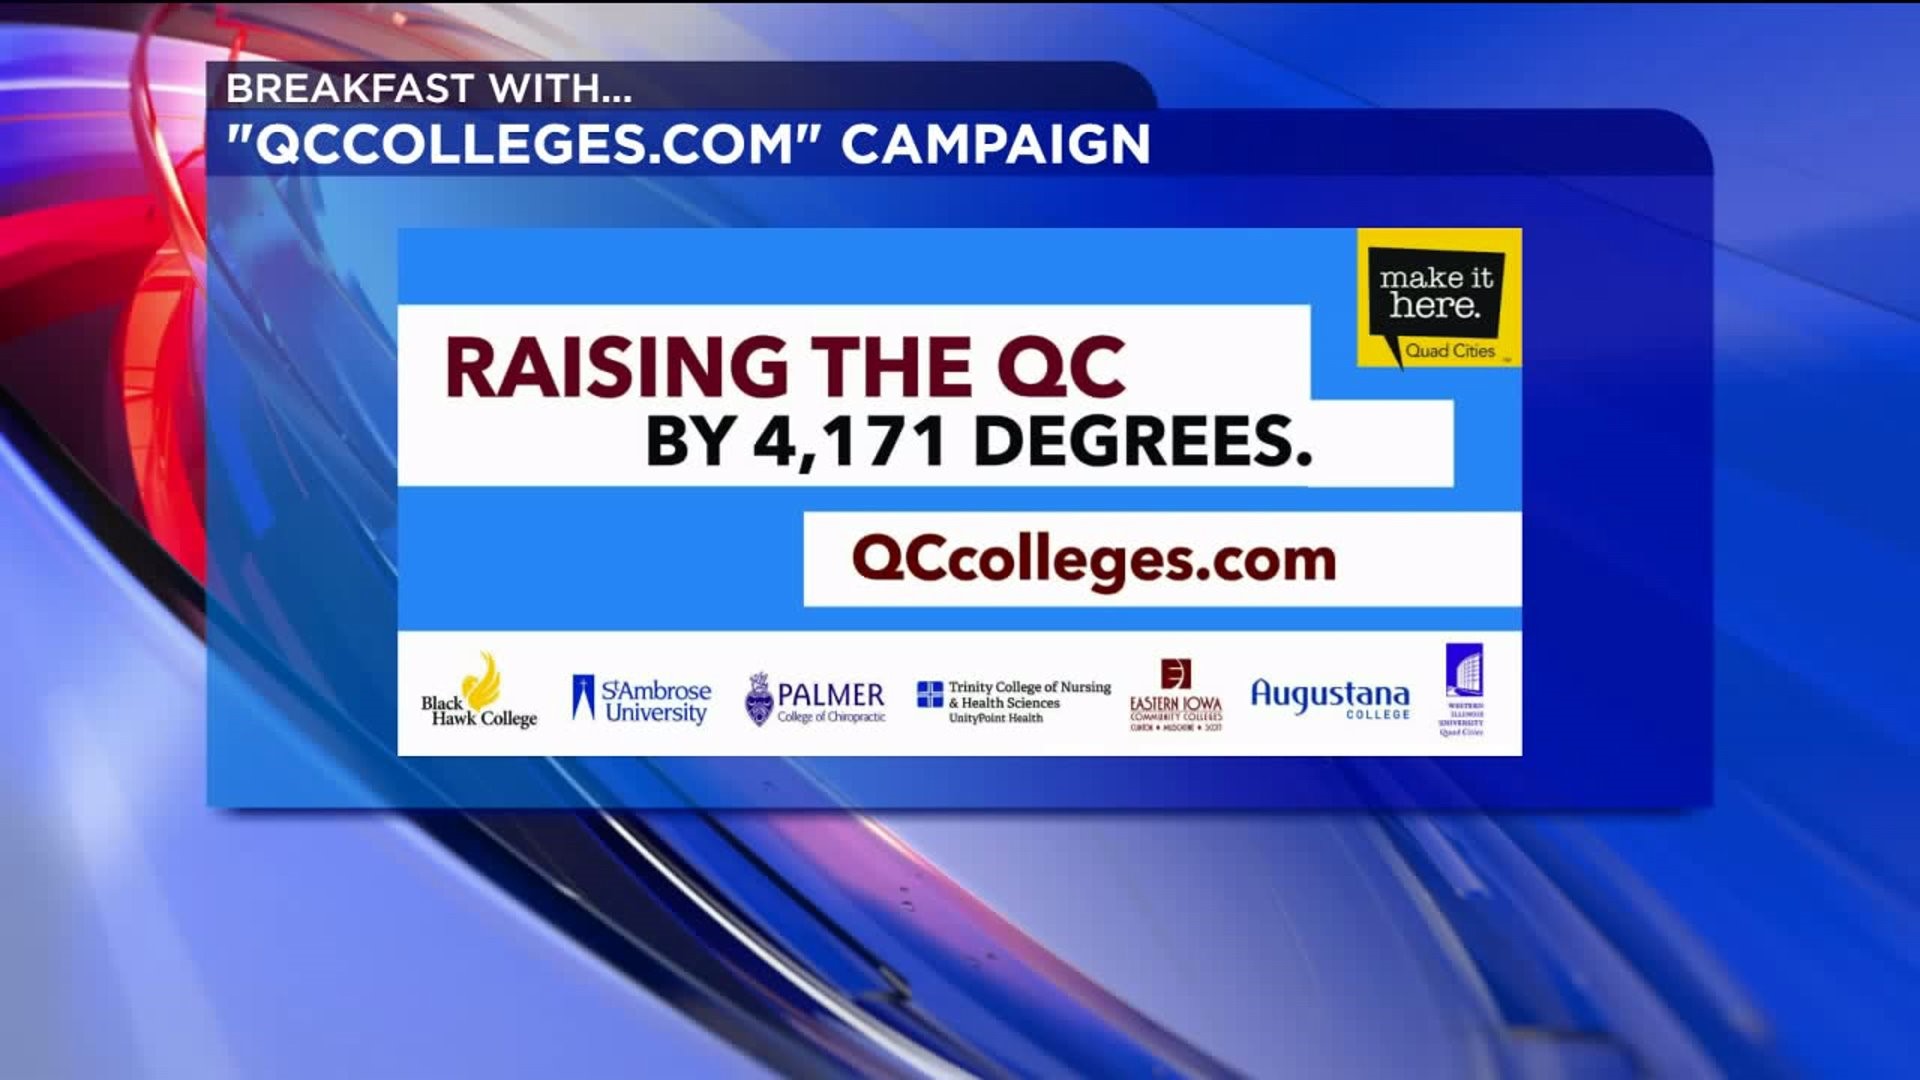 What is the QCColleges.com Campaign?